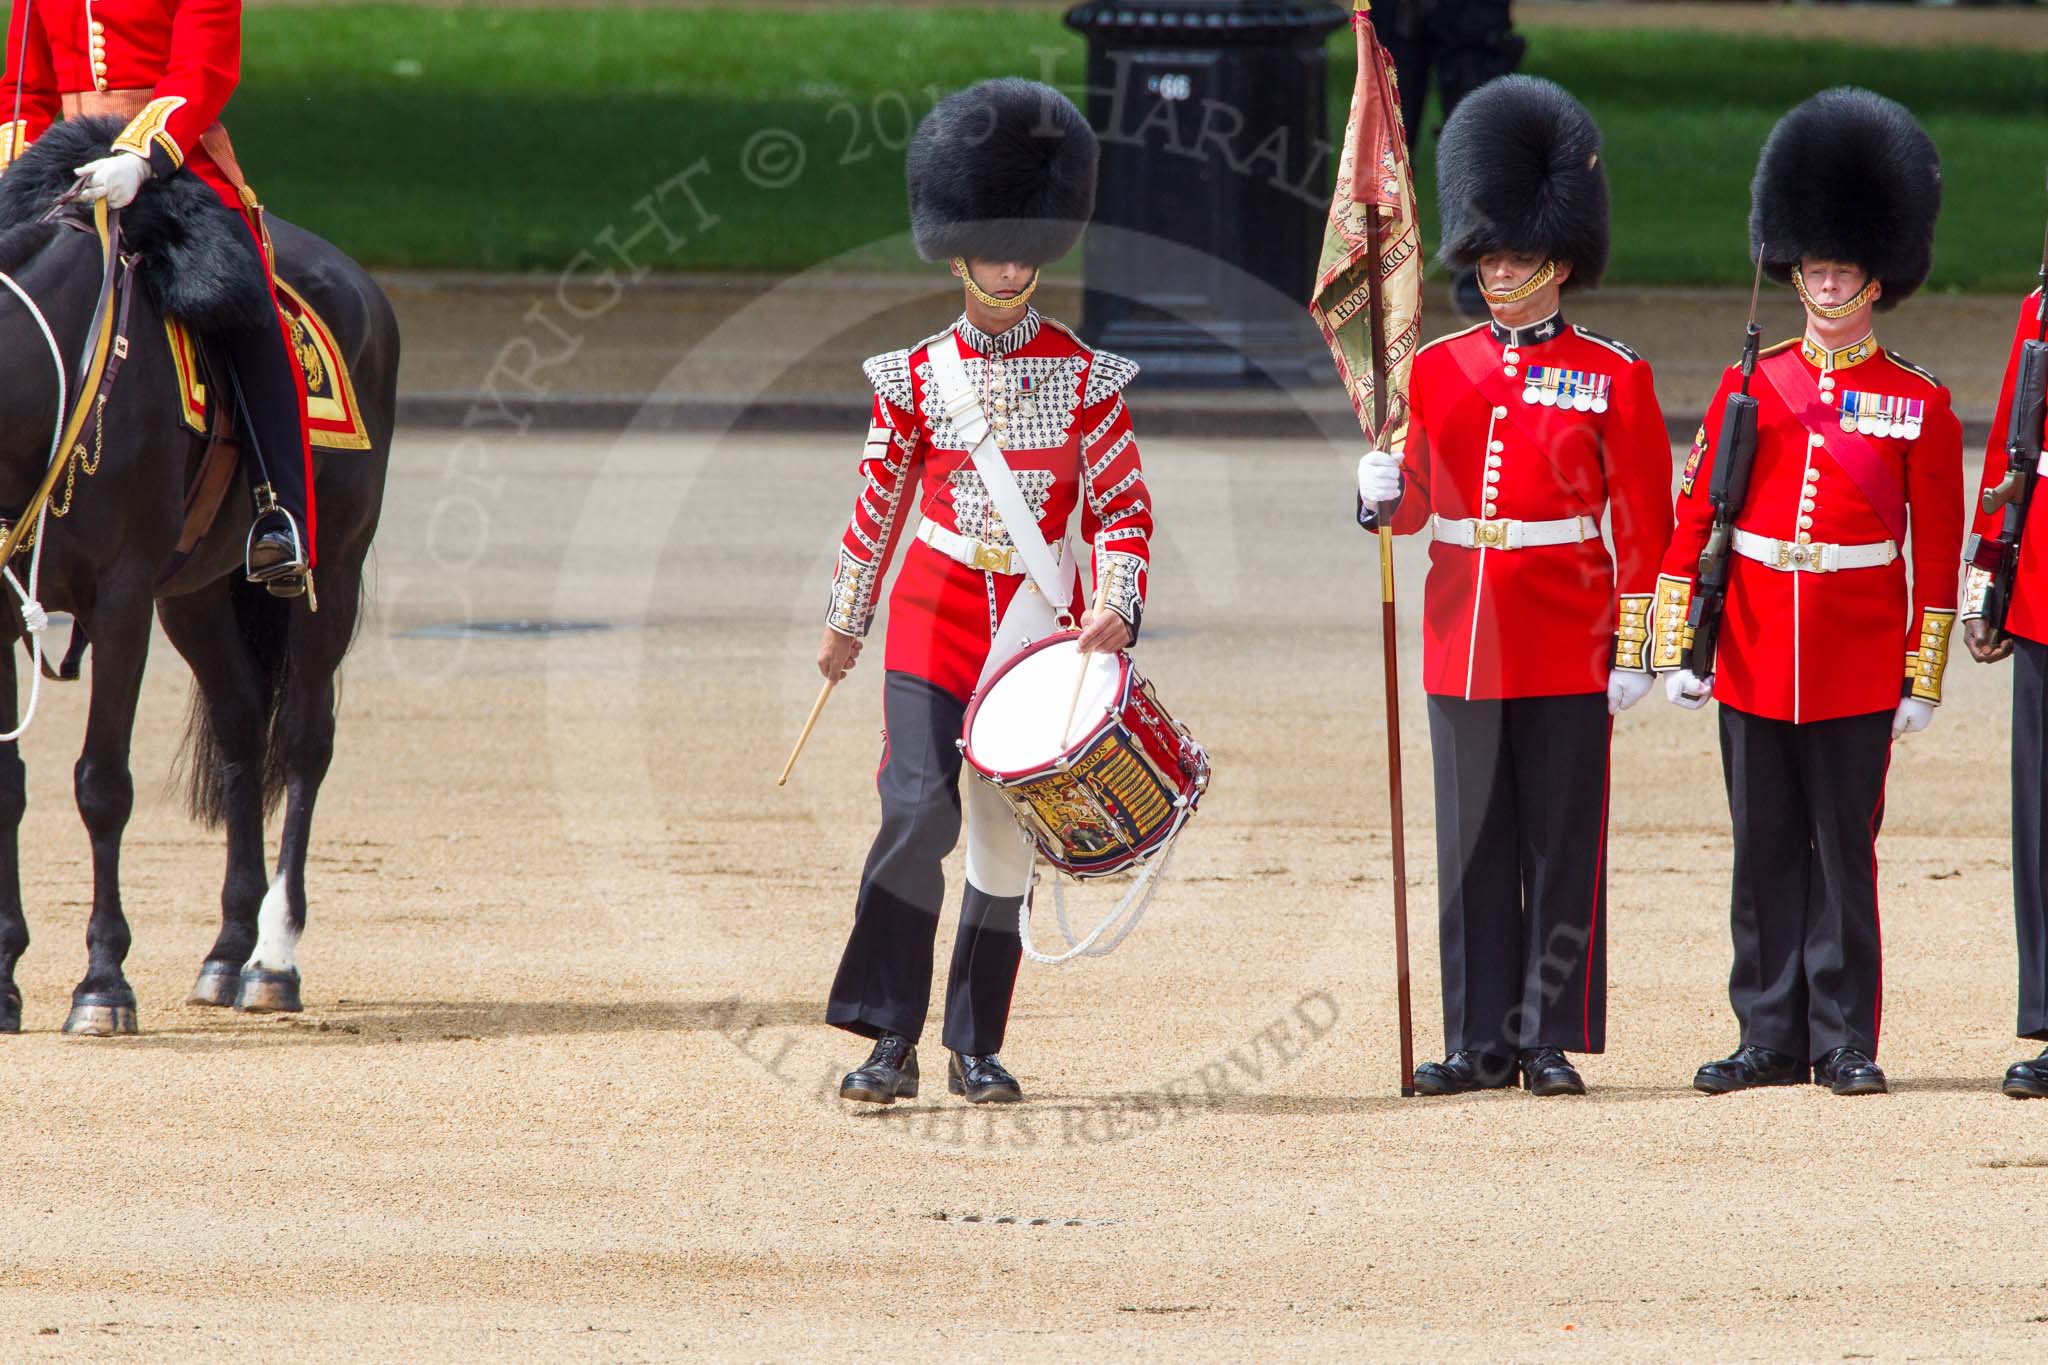 The Colonel's Review 2013: The "Lone Drummer", Lance Corporal Christopher Rees,  marches forward to re-join the band..
Horse Guards Parade, Westminster,
London SW1,

United Kingdom,
on 08 June 2013 at 11:15, image #470